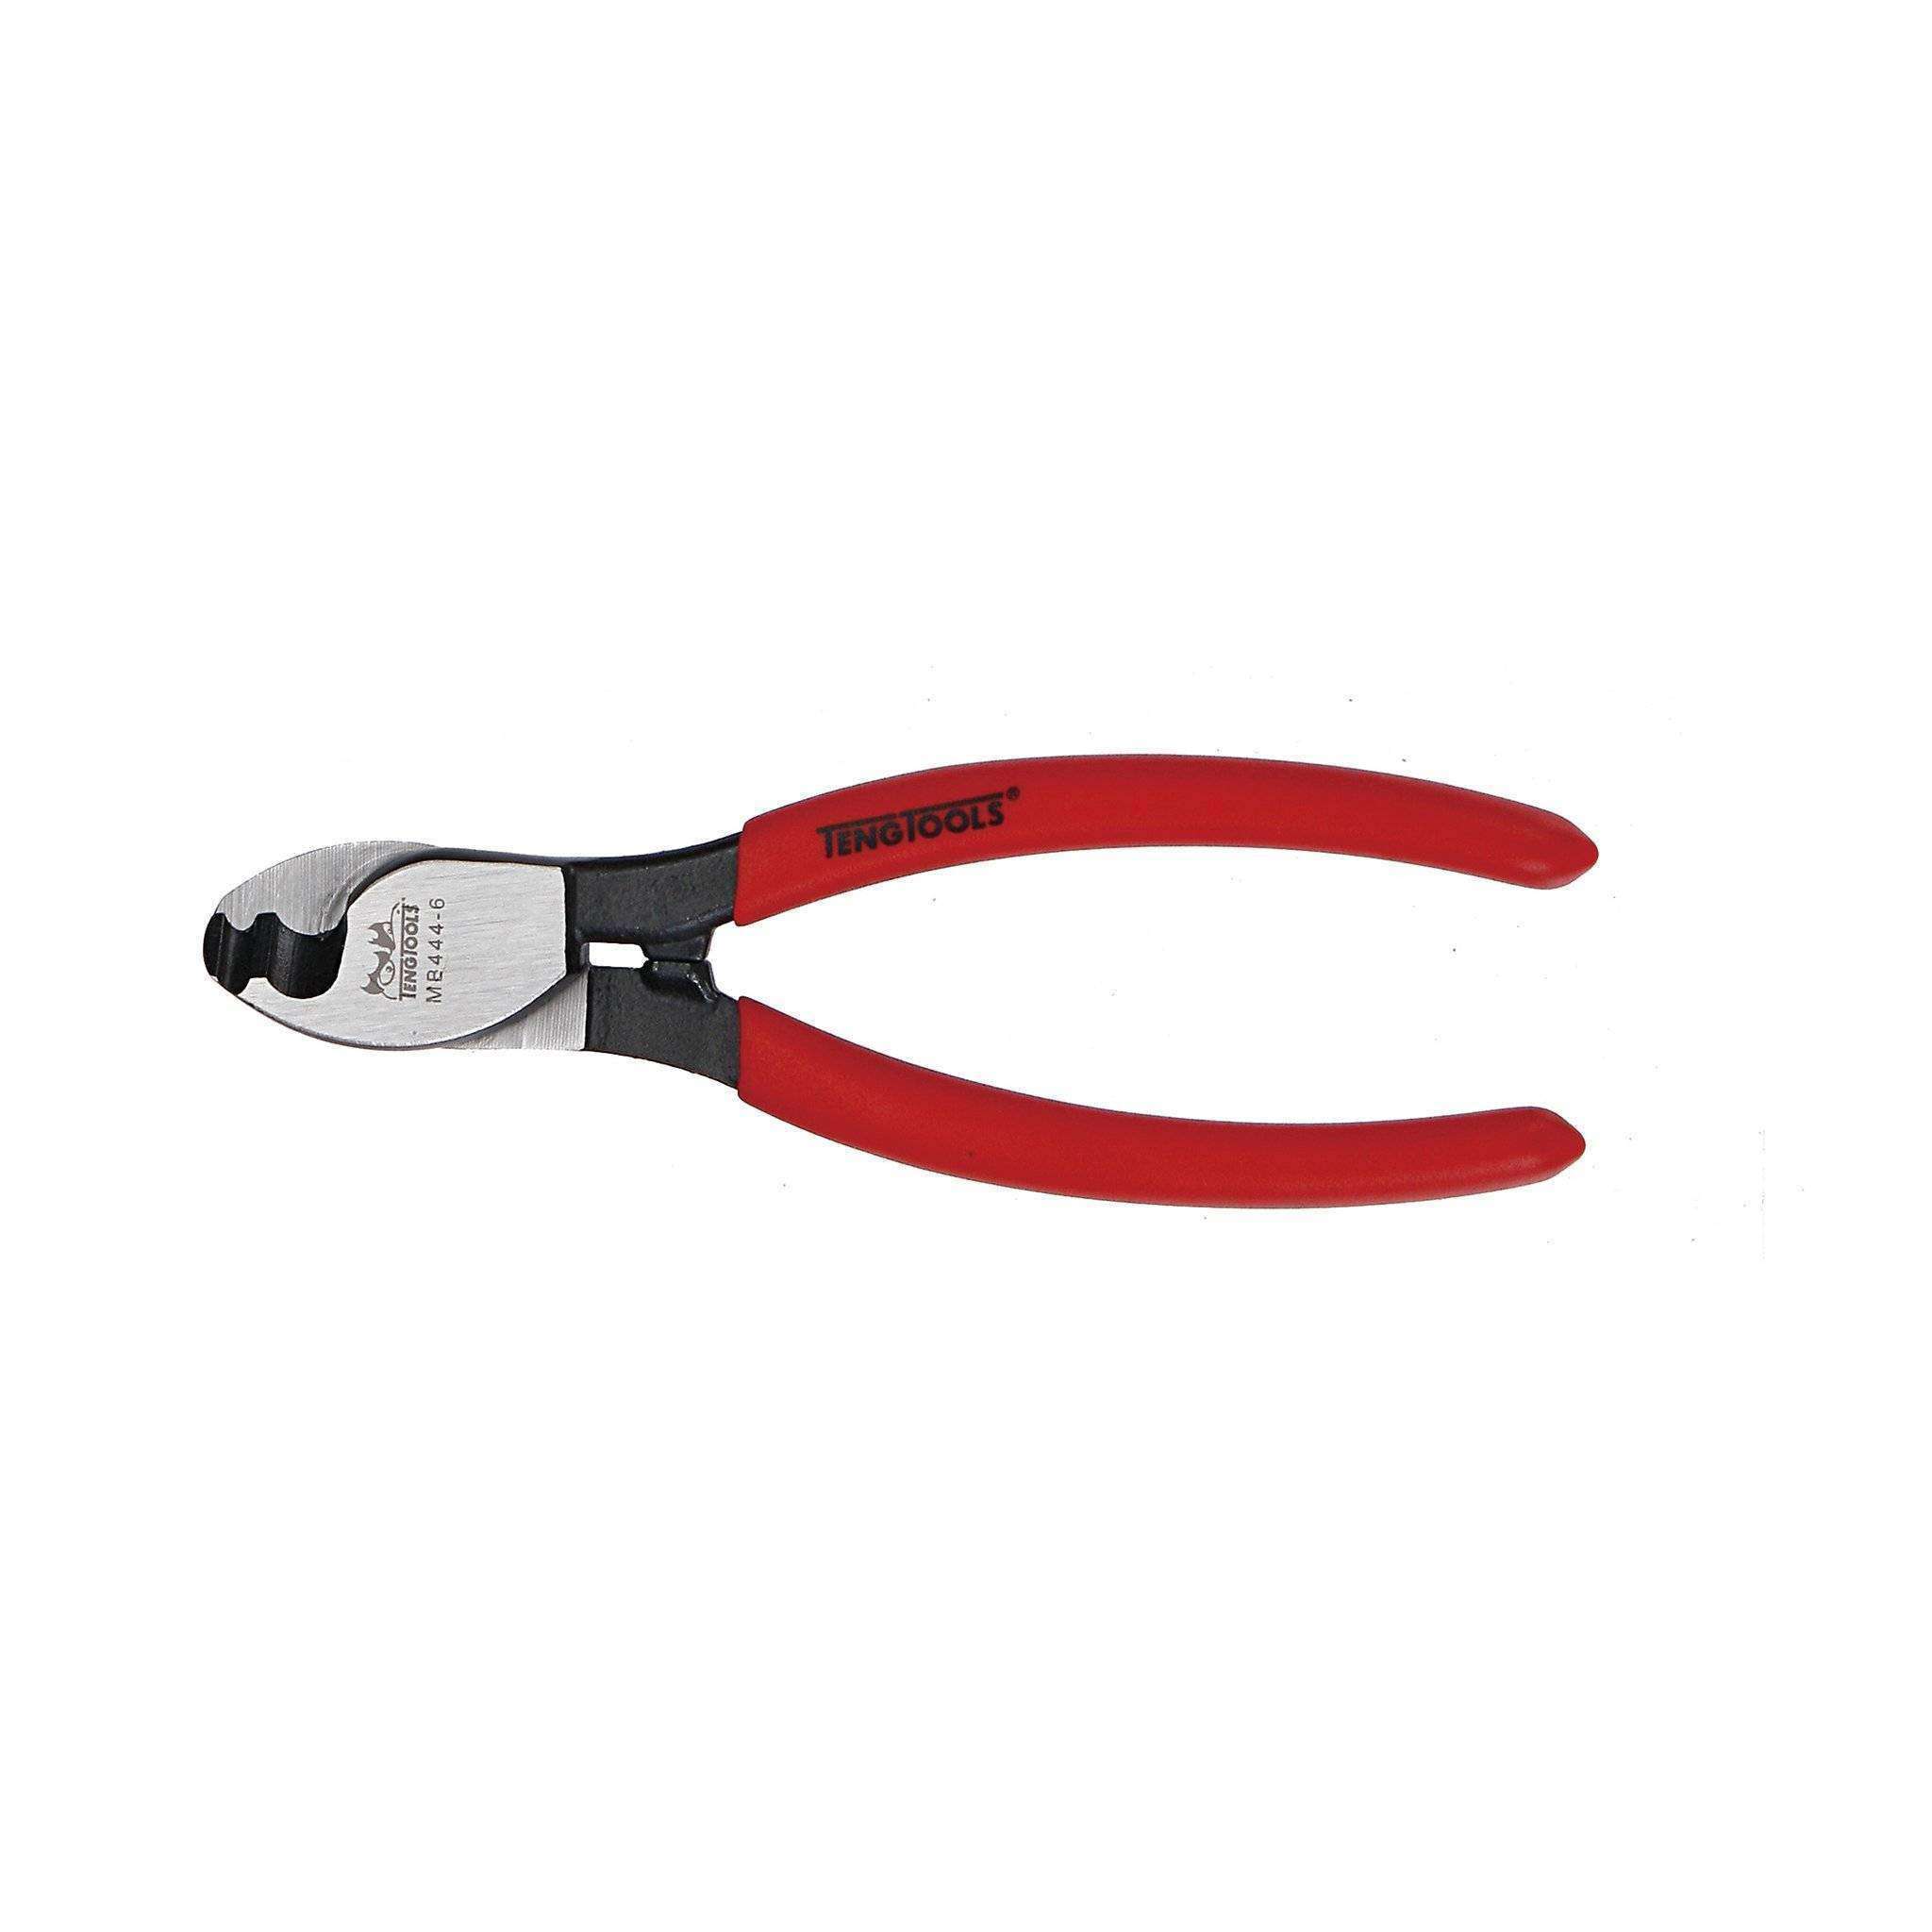 Teng Tools 6 Inch Vinyl Dipped Handle Cable Cutters for Cutting Copper & Aluminum - MB444-6